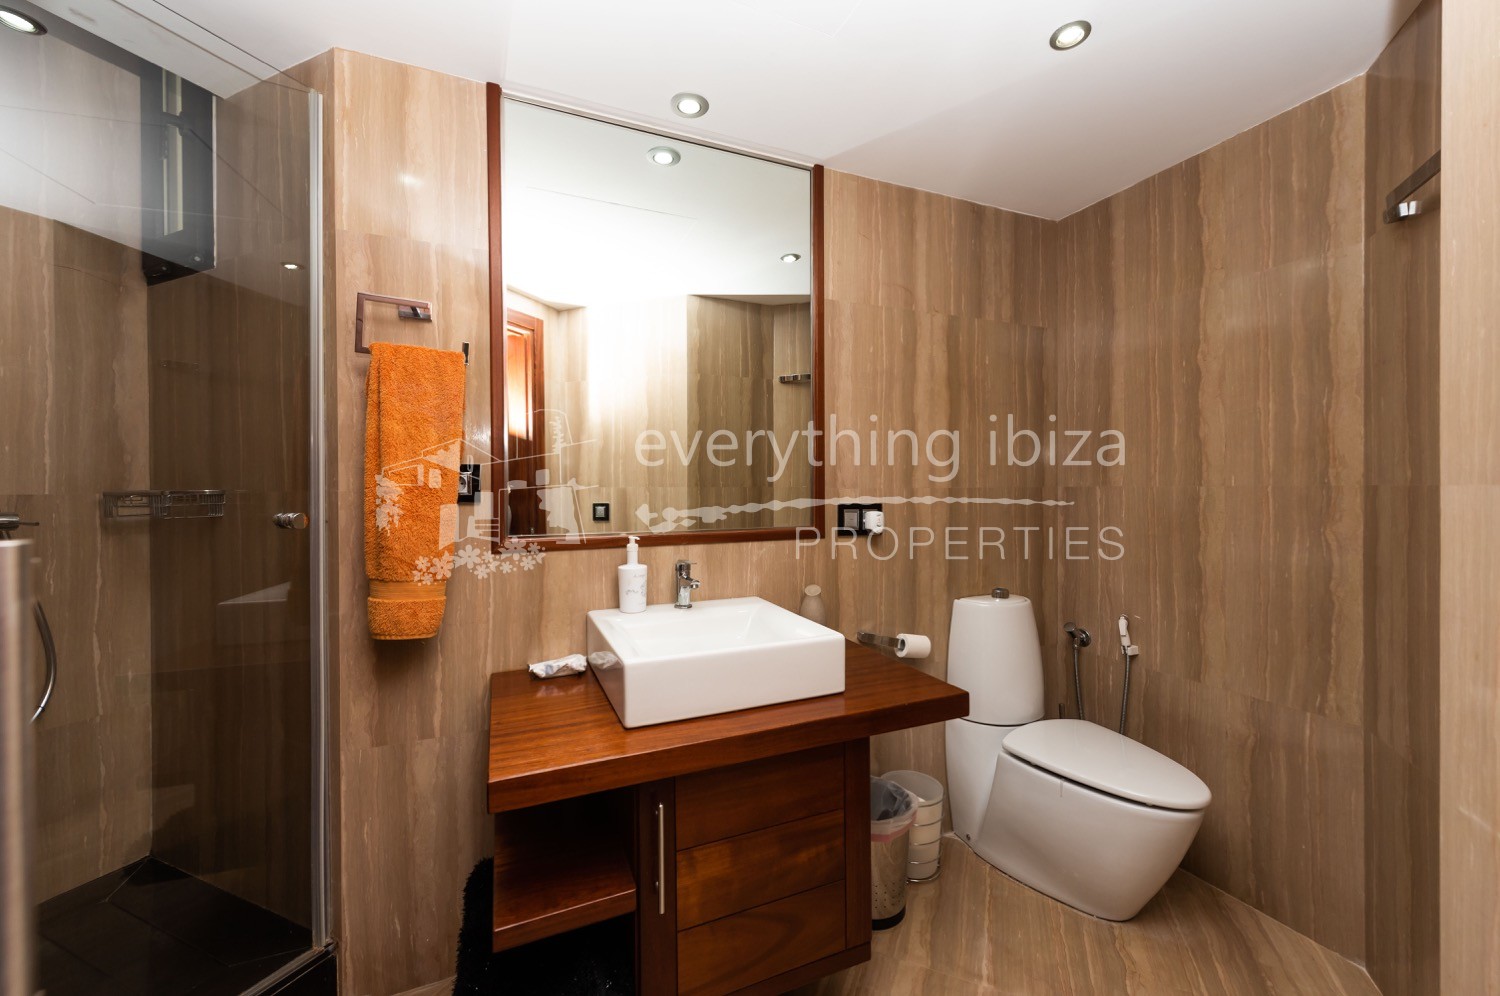 ref 1183 - Exquisite Villa for sale in Ibiza by everything ibiza Properties